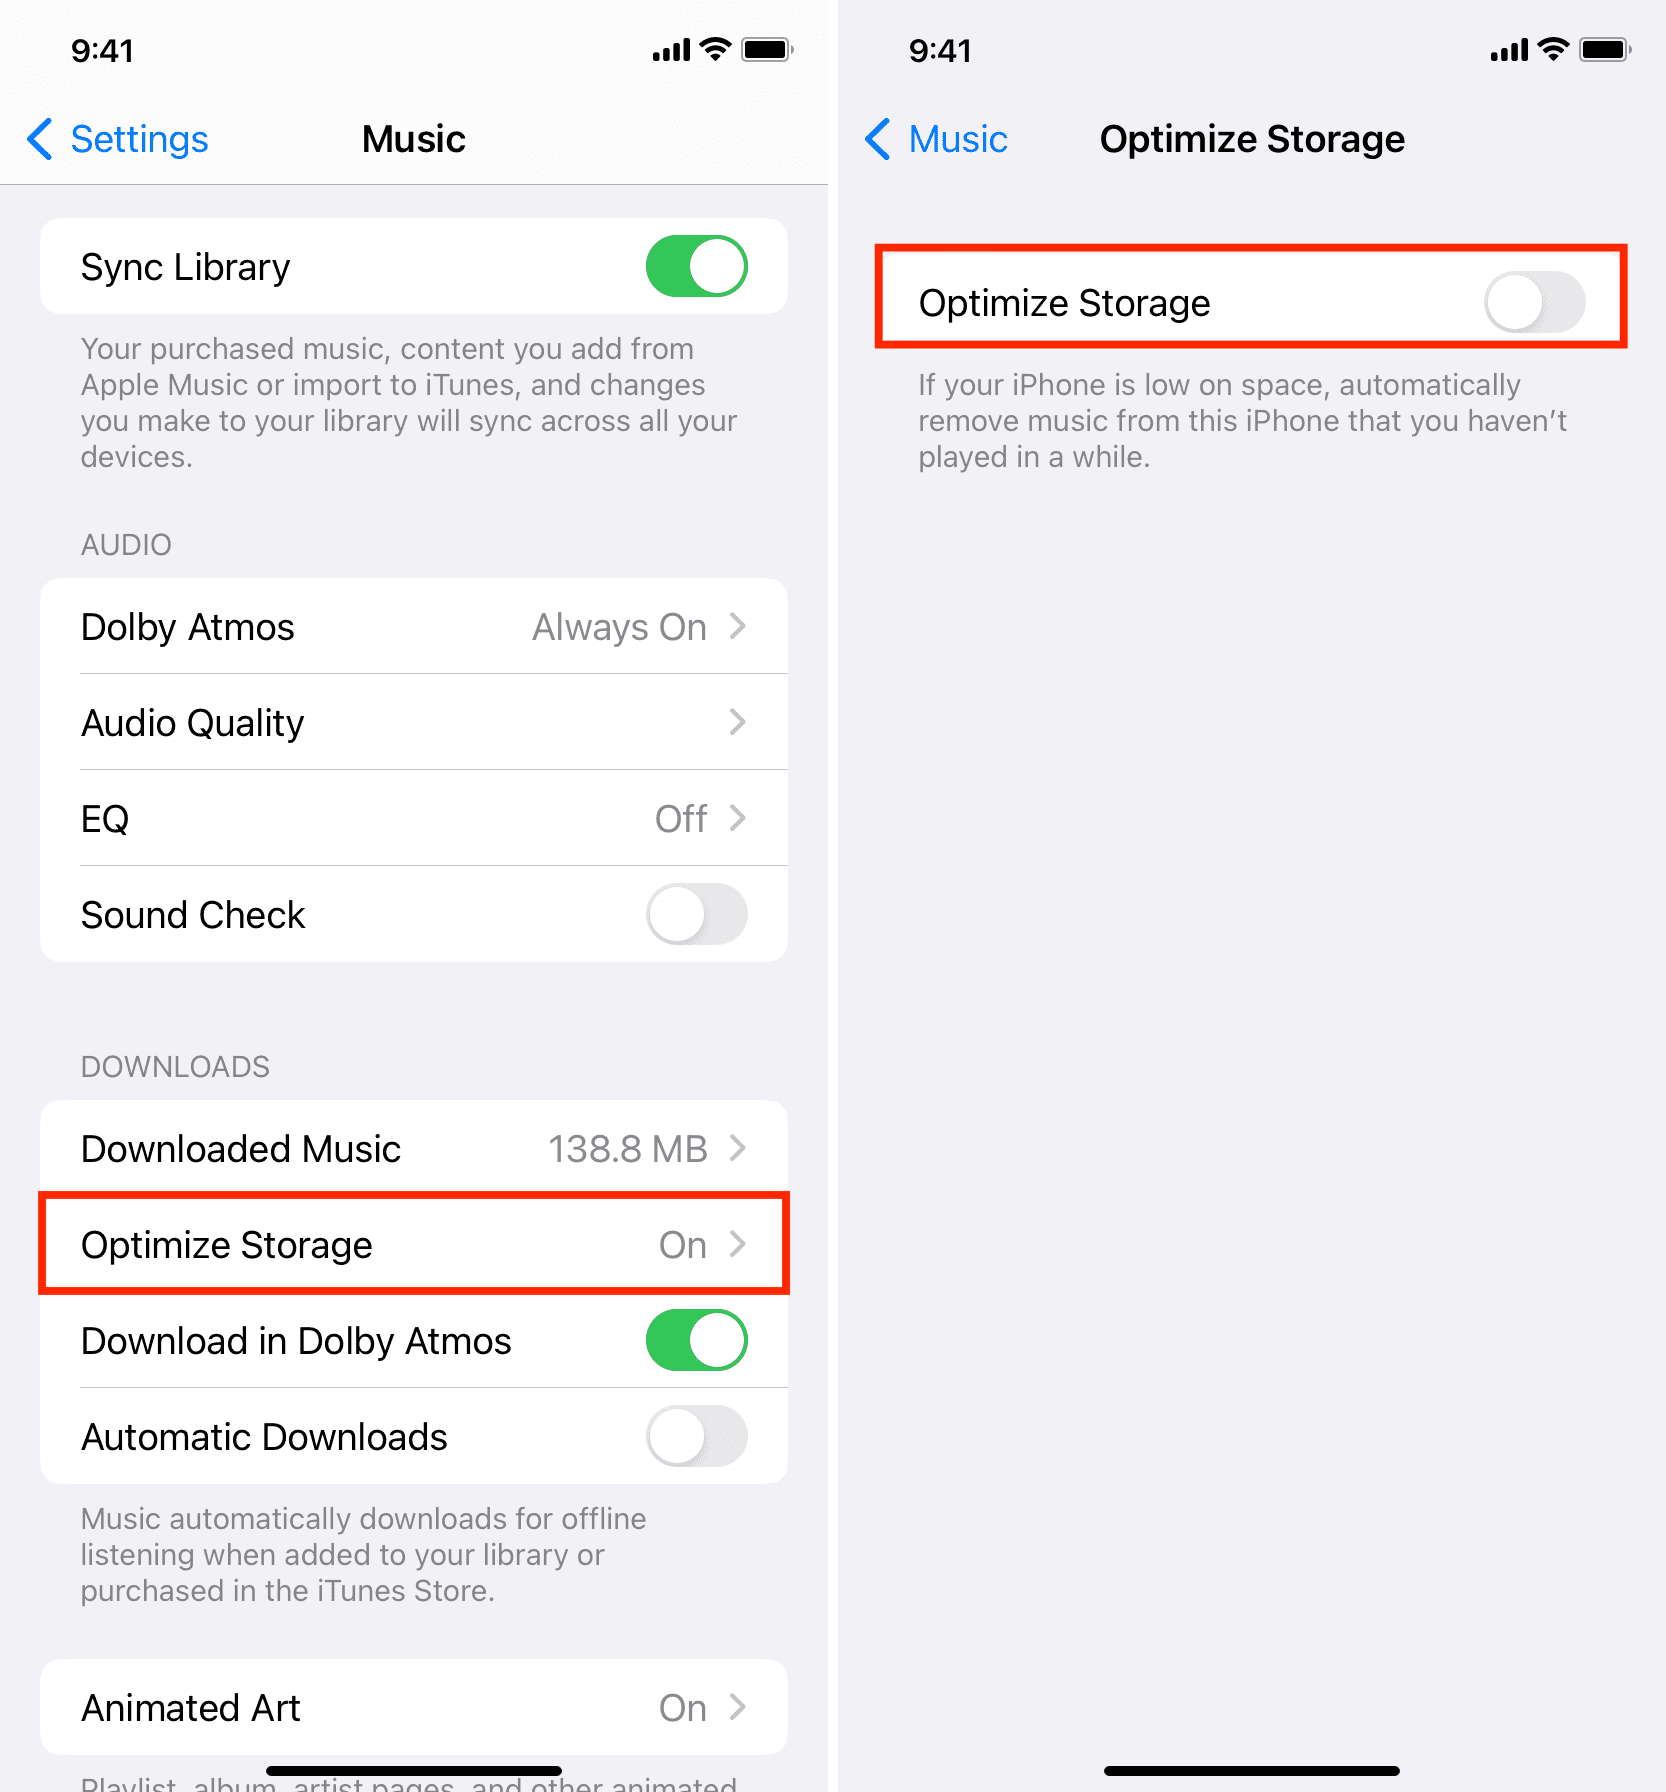 Turn off Optimize Storage in iPhone Music settings